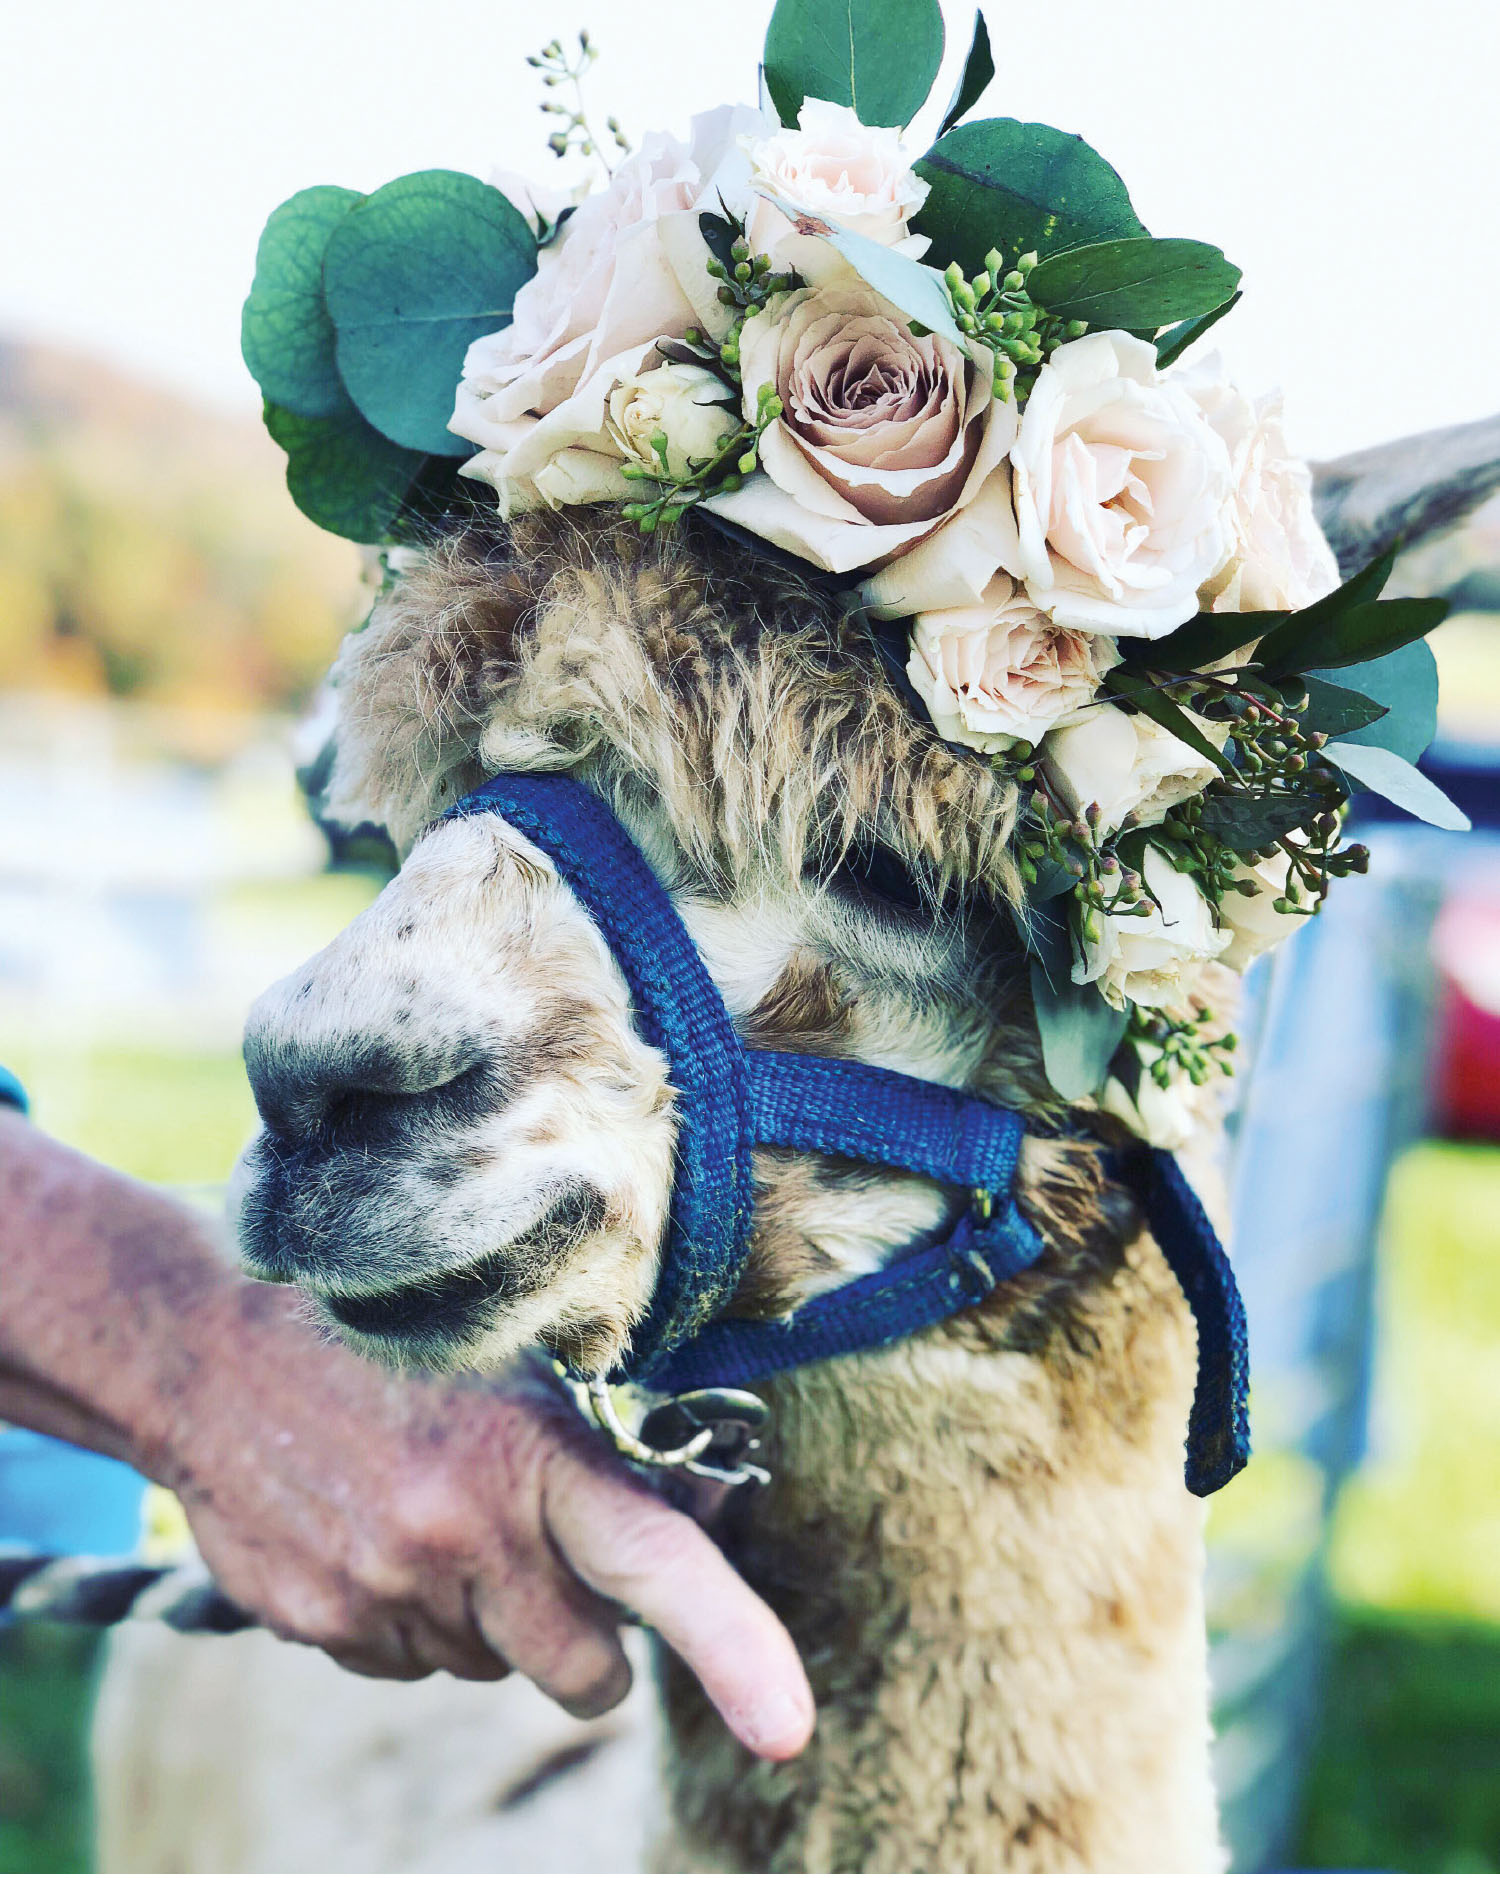 Custom Millinery for Alpacas  (and other tidings of comfort and joy)